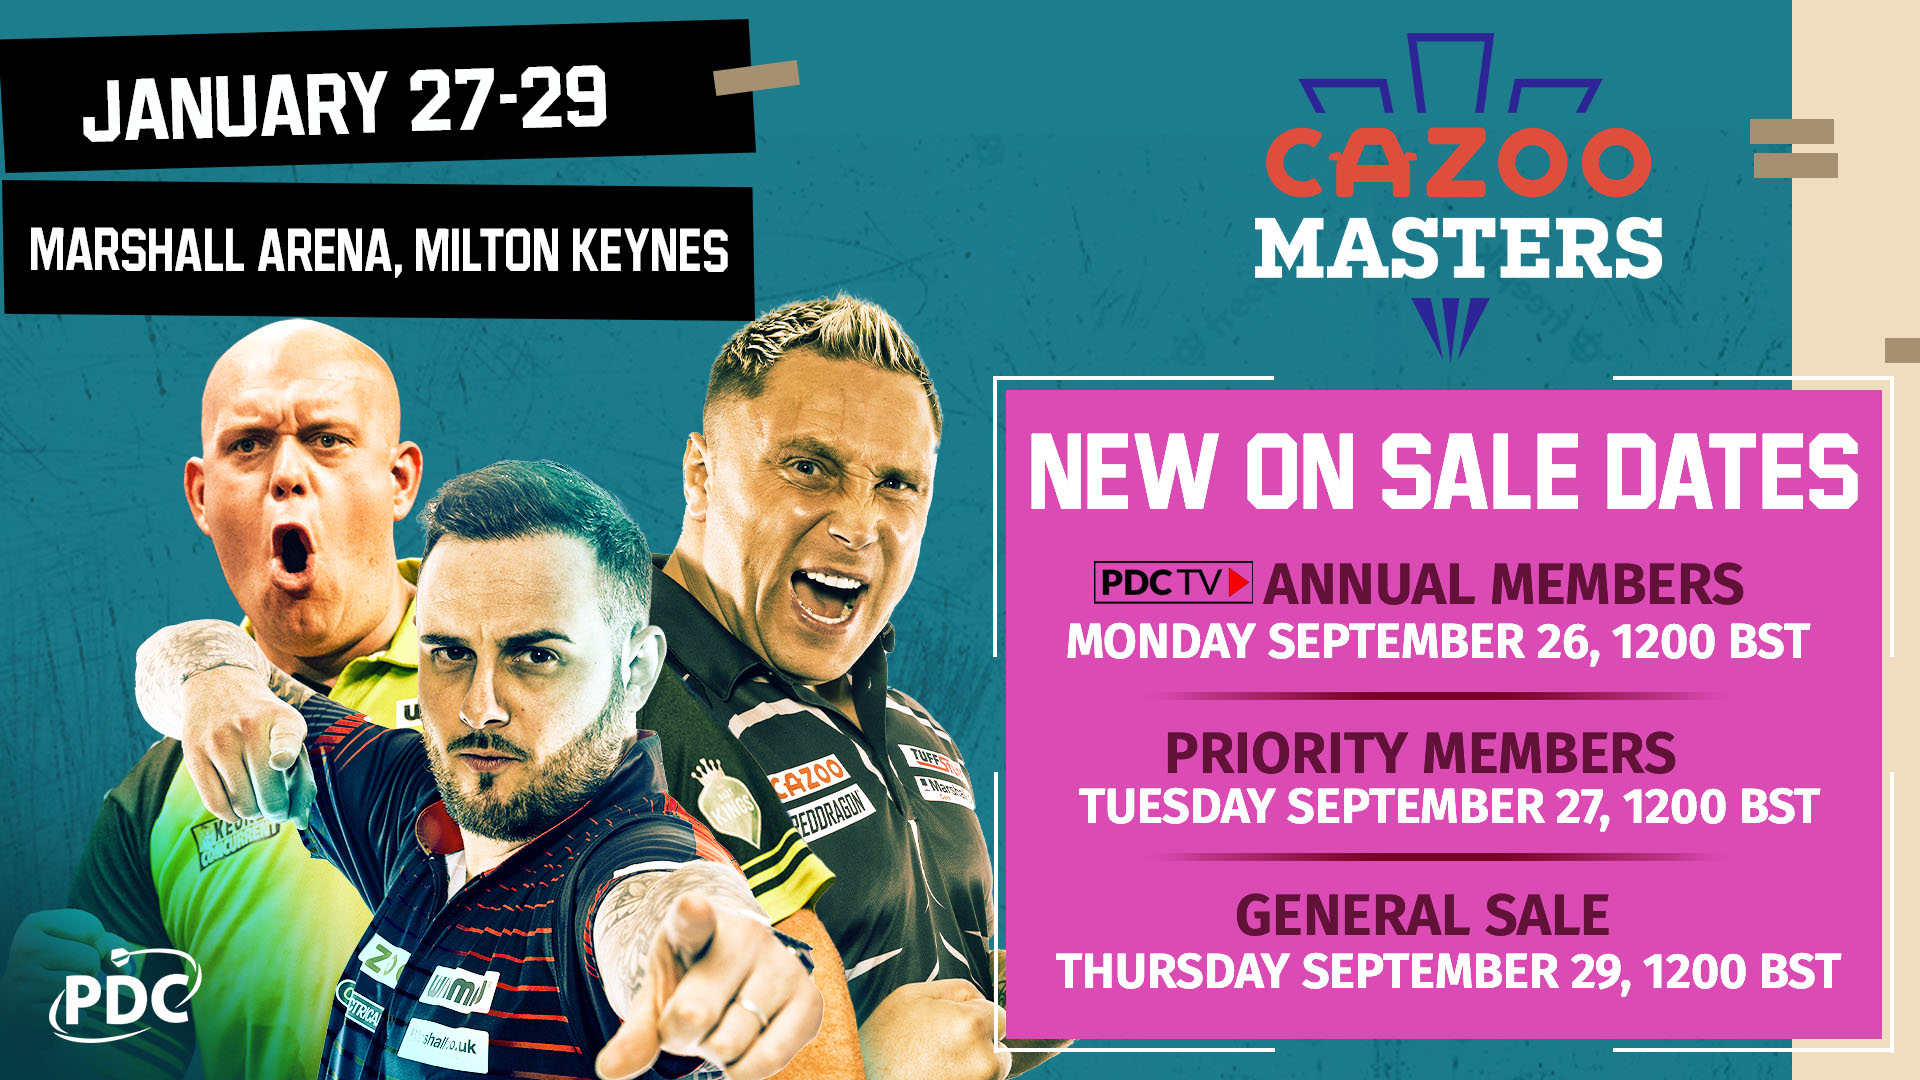 Cazoo Masters tickets on sale dates